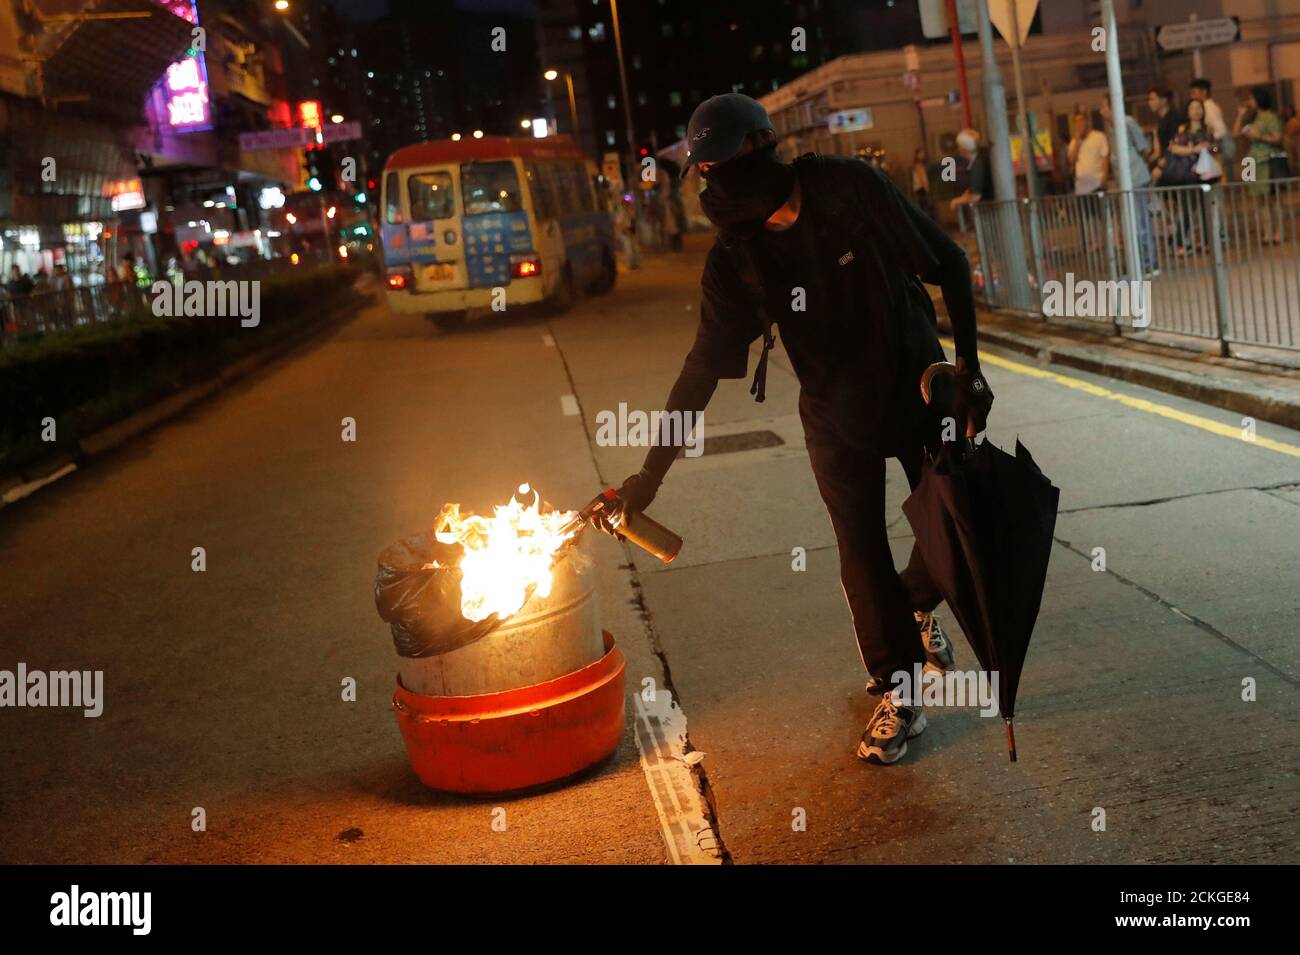 An anti-government protester set up a trash can on fire during a protest in Tsuen Wan, near the site where police shot a protester with live ammunition on China's National Day in Hong Kong, China October 13, 2019. REUTERS/Susana Vera Stock Photo